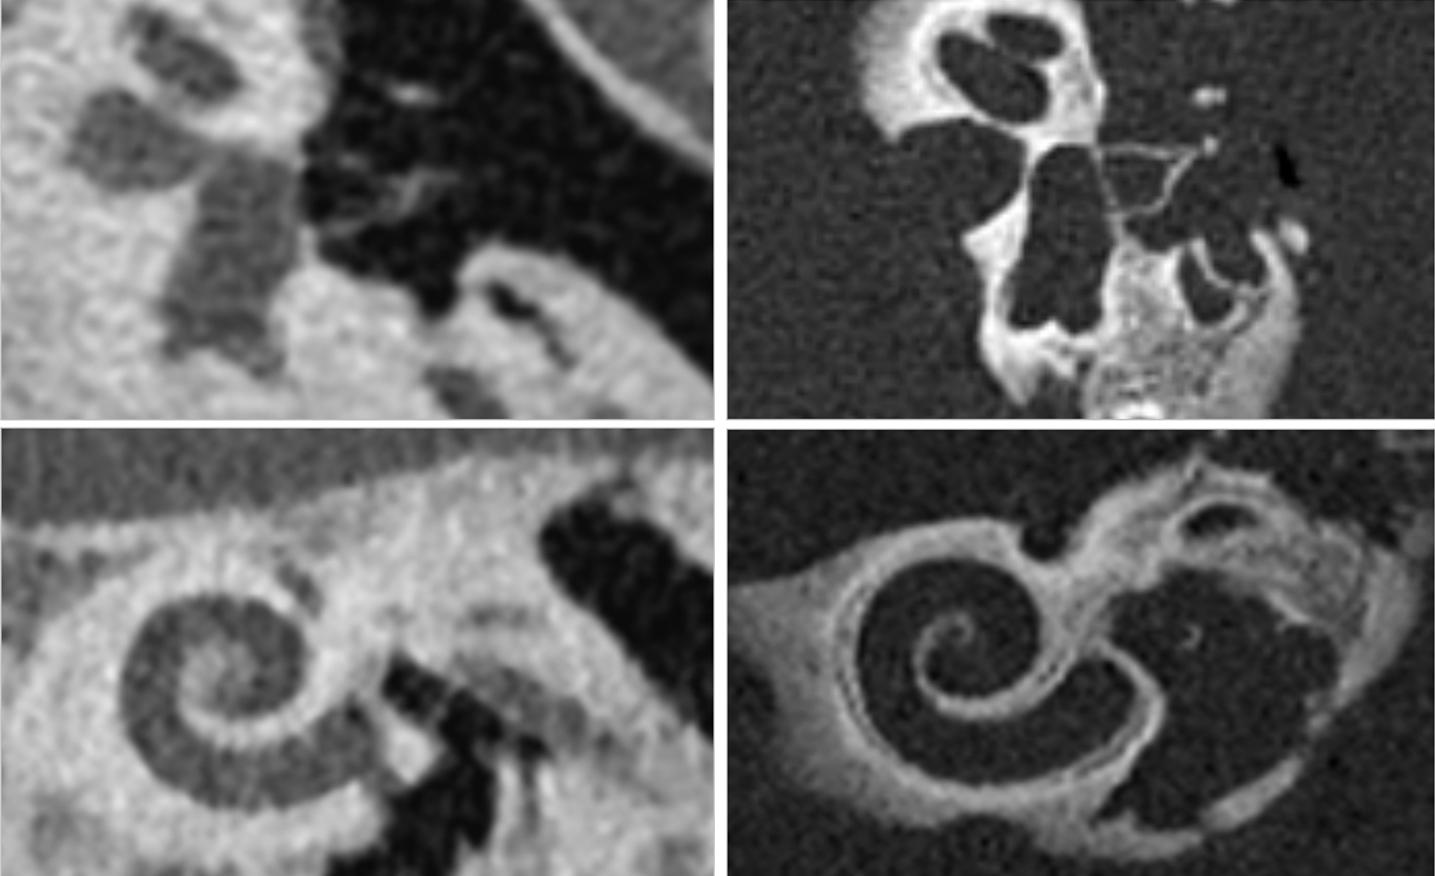 Improved visualization of the middle and inner ear enabled by photon-counting CT. Tiny anatomical structural of the middle and inner ear such as the stapes (upper row), and the cochlea (lower row). The left images were acquired using conventional CT imaging and the images on the right use photo-counting CT. Images courtesy of Dr. A. Persson, Linkoping University, Sweden.